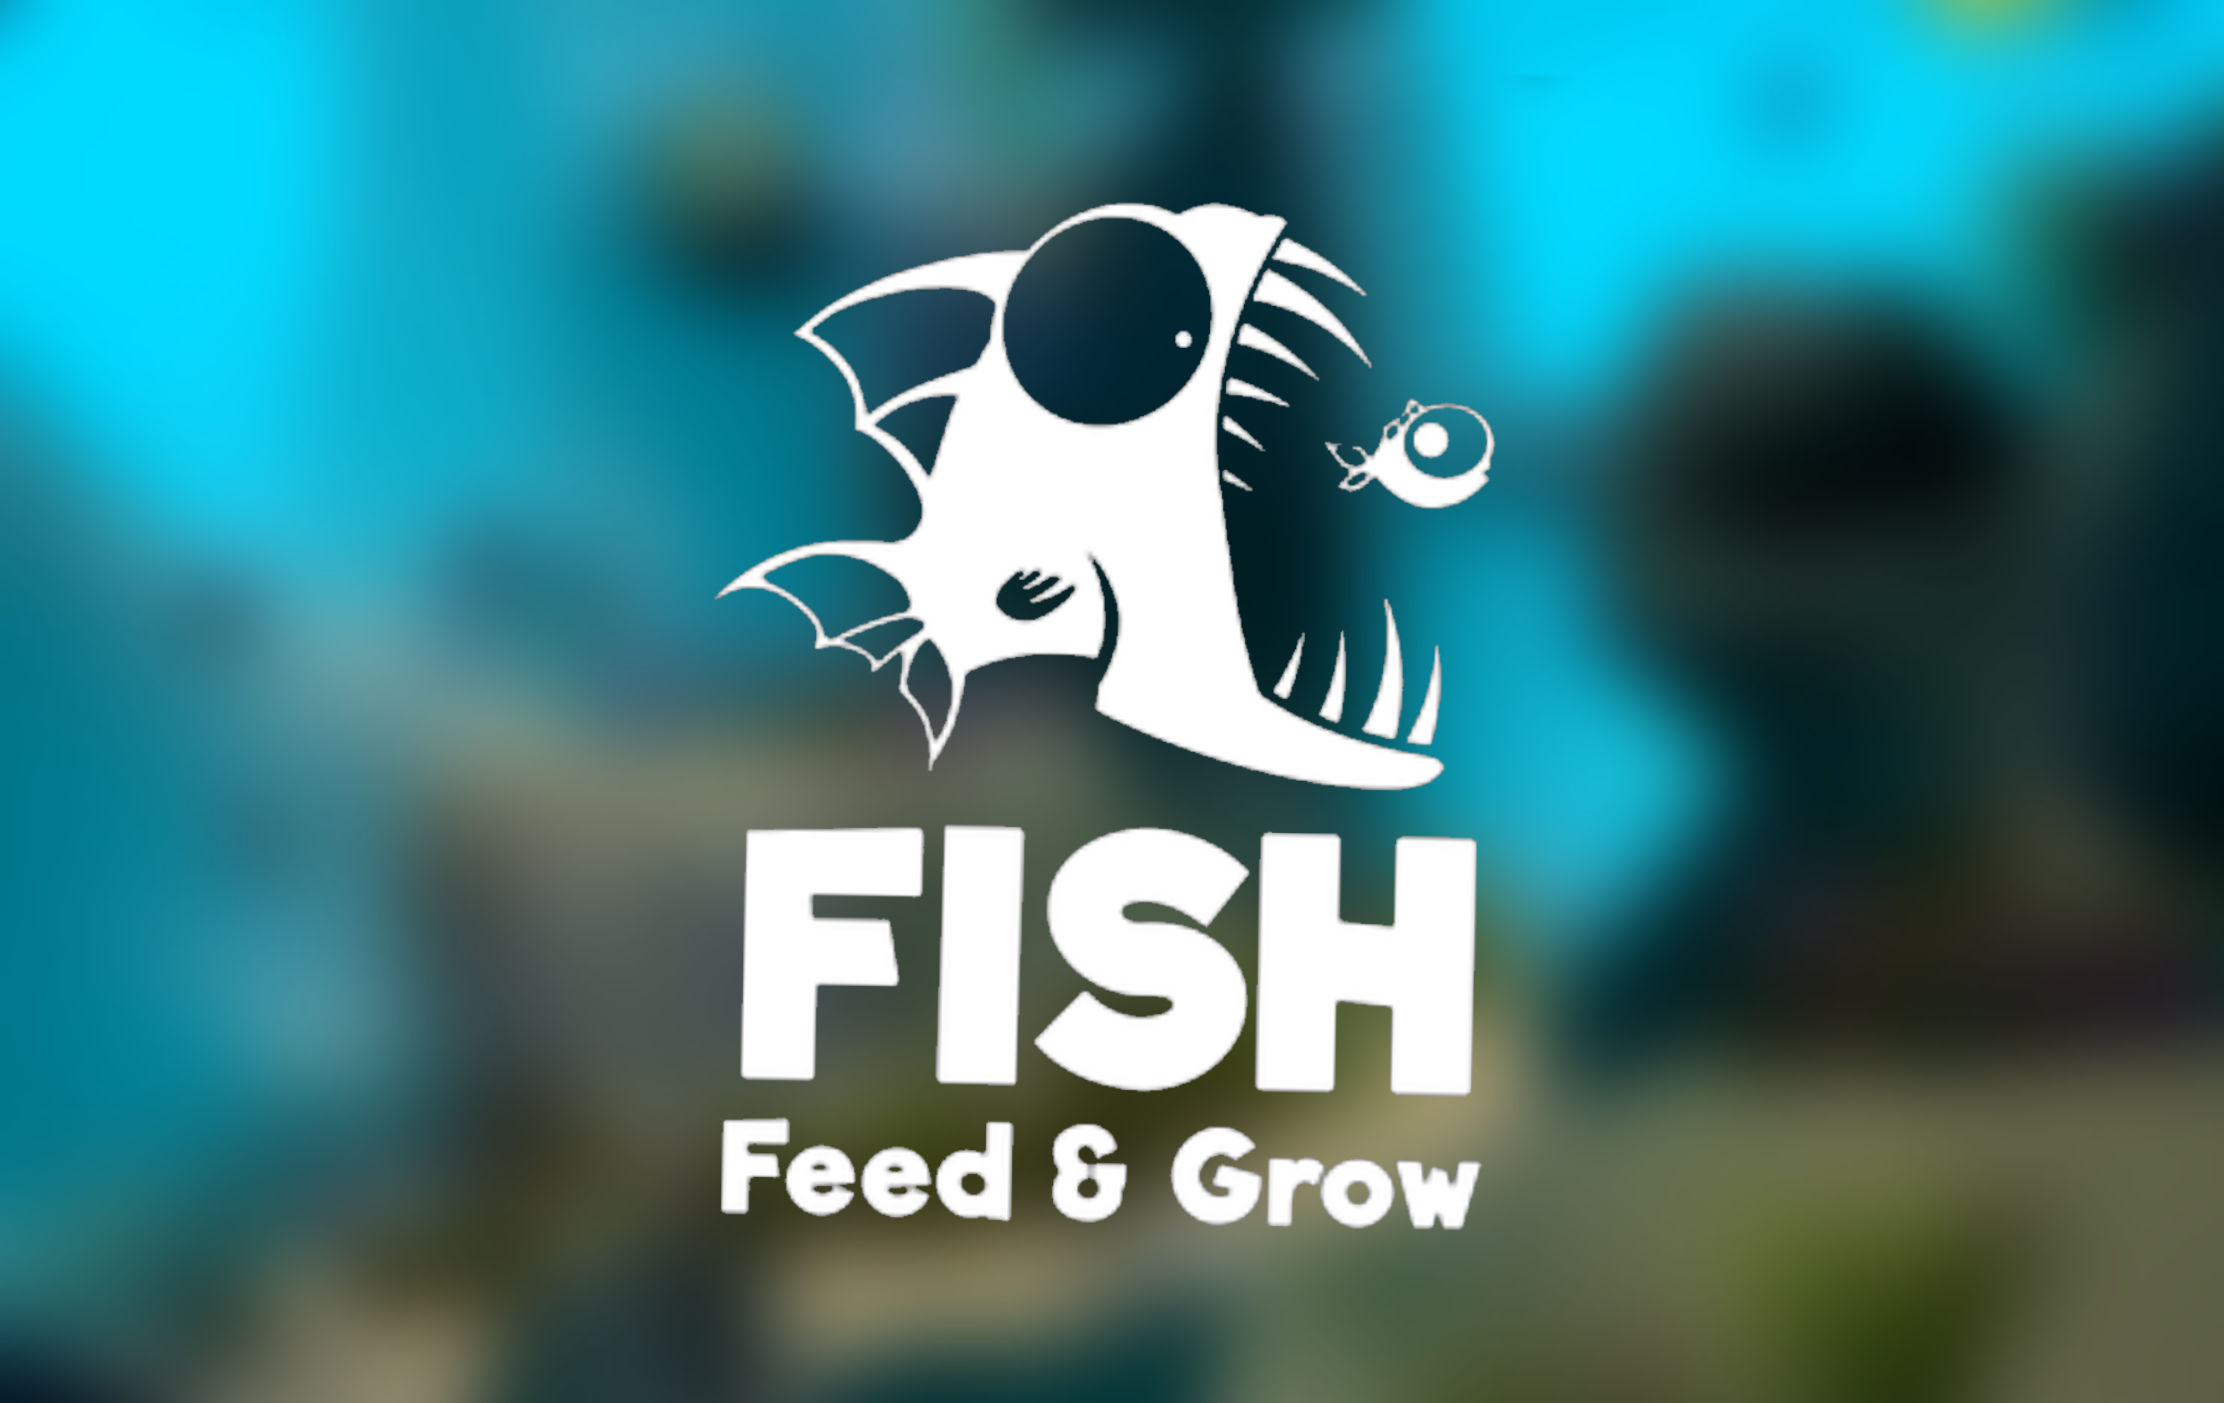 Fish Feed & Grow Tips Game in 2023  Survival games, Fish feed, Grow games